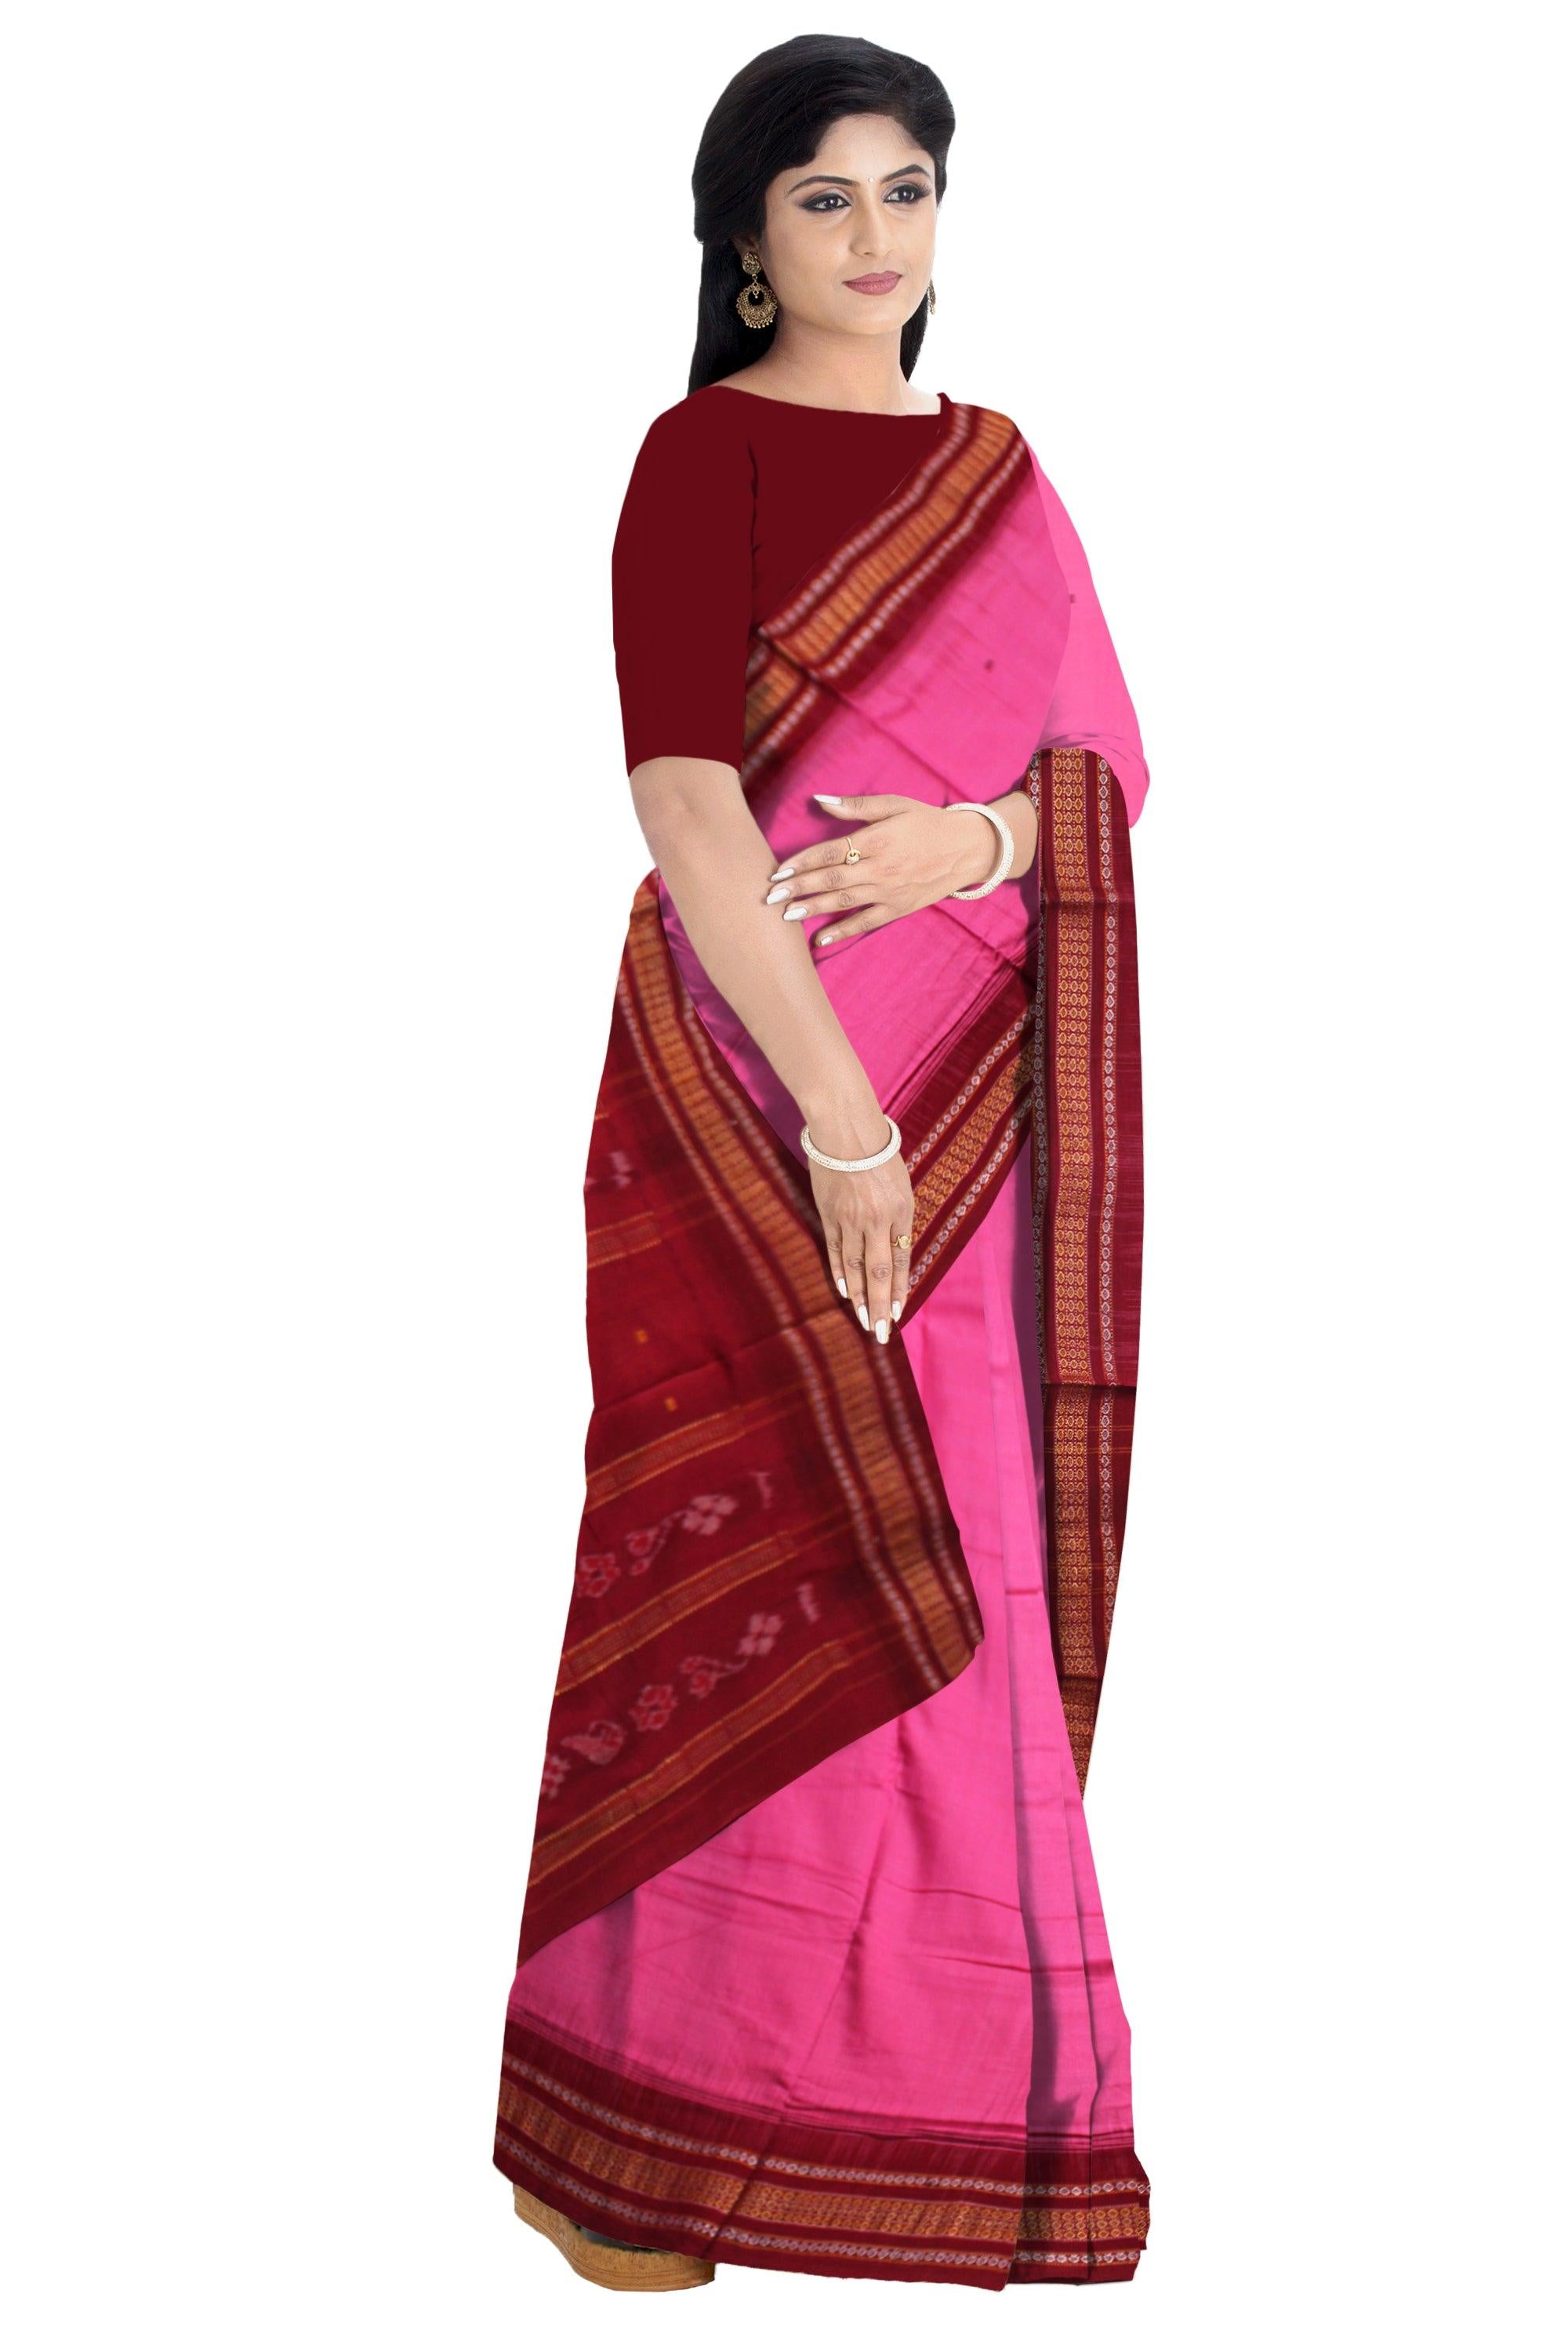 A SMALL BOOTY PATTERN COTTON SAREE IS PINK AND MAROON COLOR BASE, WITHOUT BLOUSE PIECE. - Koshali Arts & Crafts Enterprise